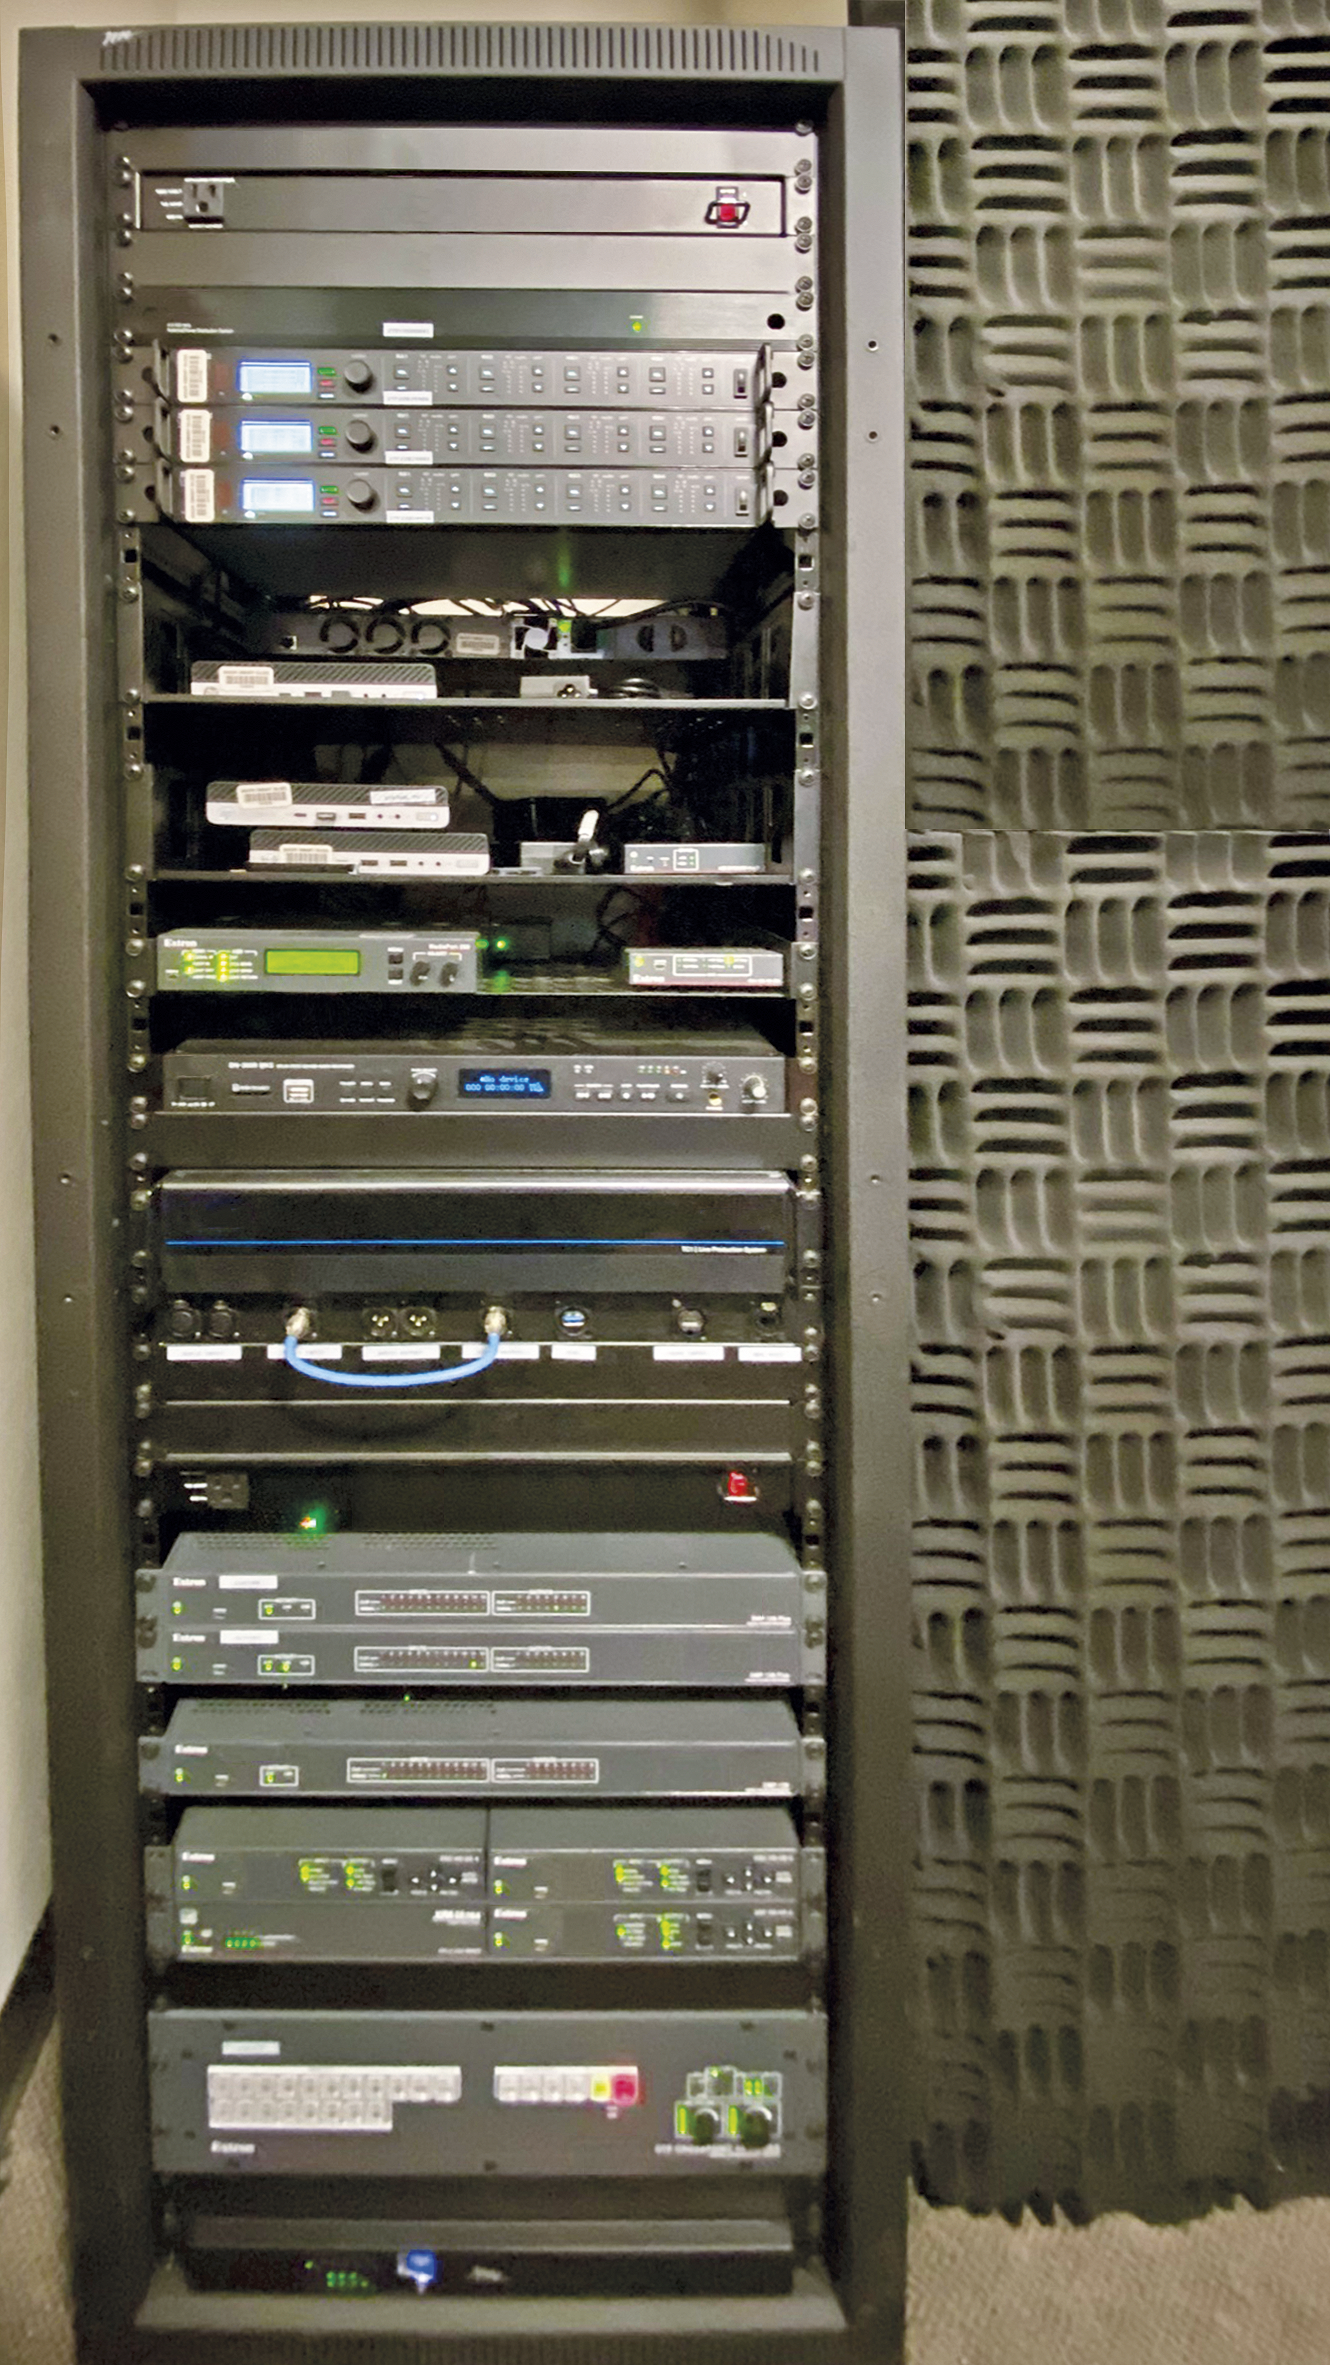 The AV system components, such as the DTP CrossPoint 108 4K IPCP MA 70 matrix switcher and the three DMP 128 audio processors, are rack-mounted within the control room.